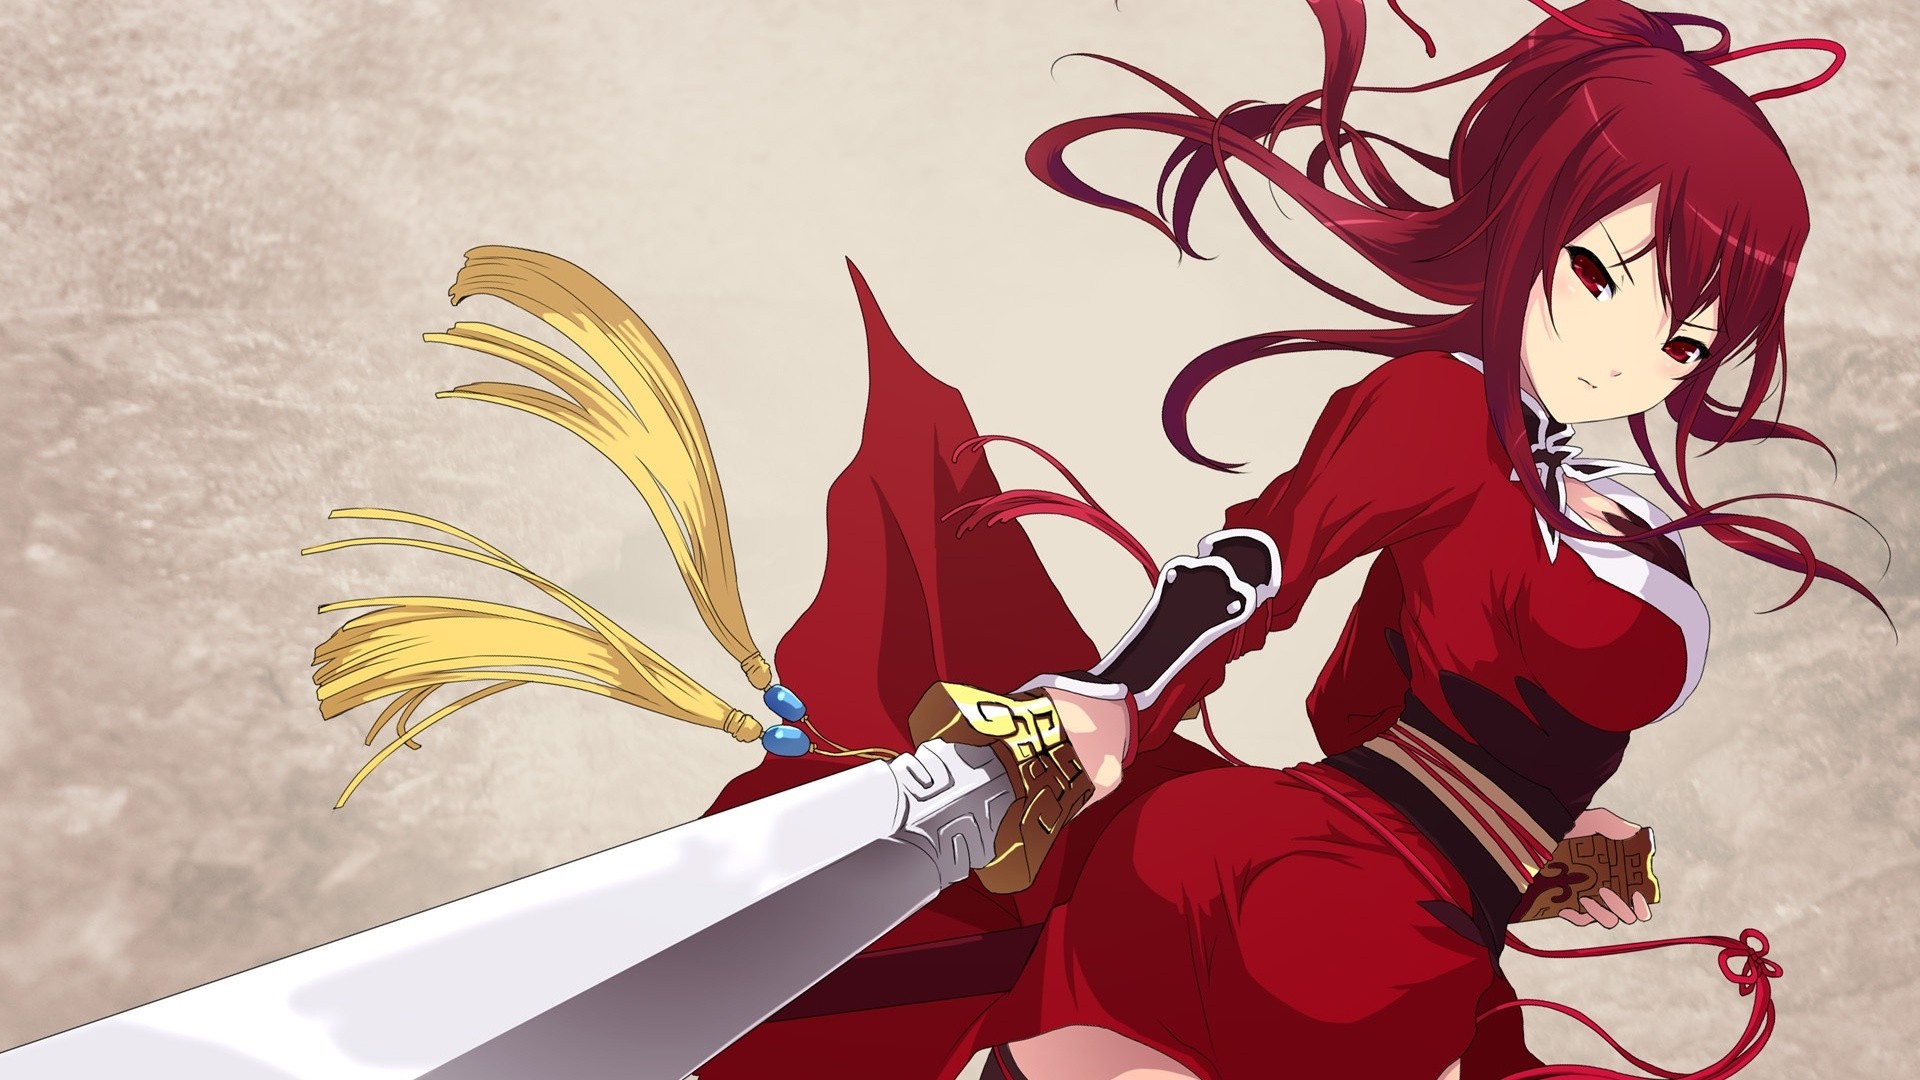 Anime Girl With Swords Wallpapers